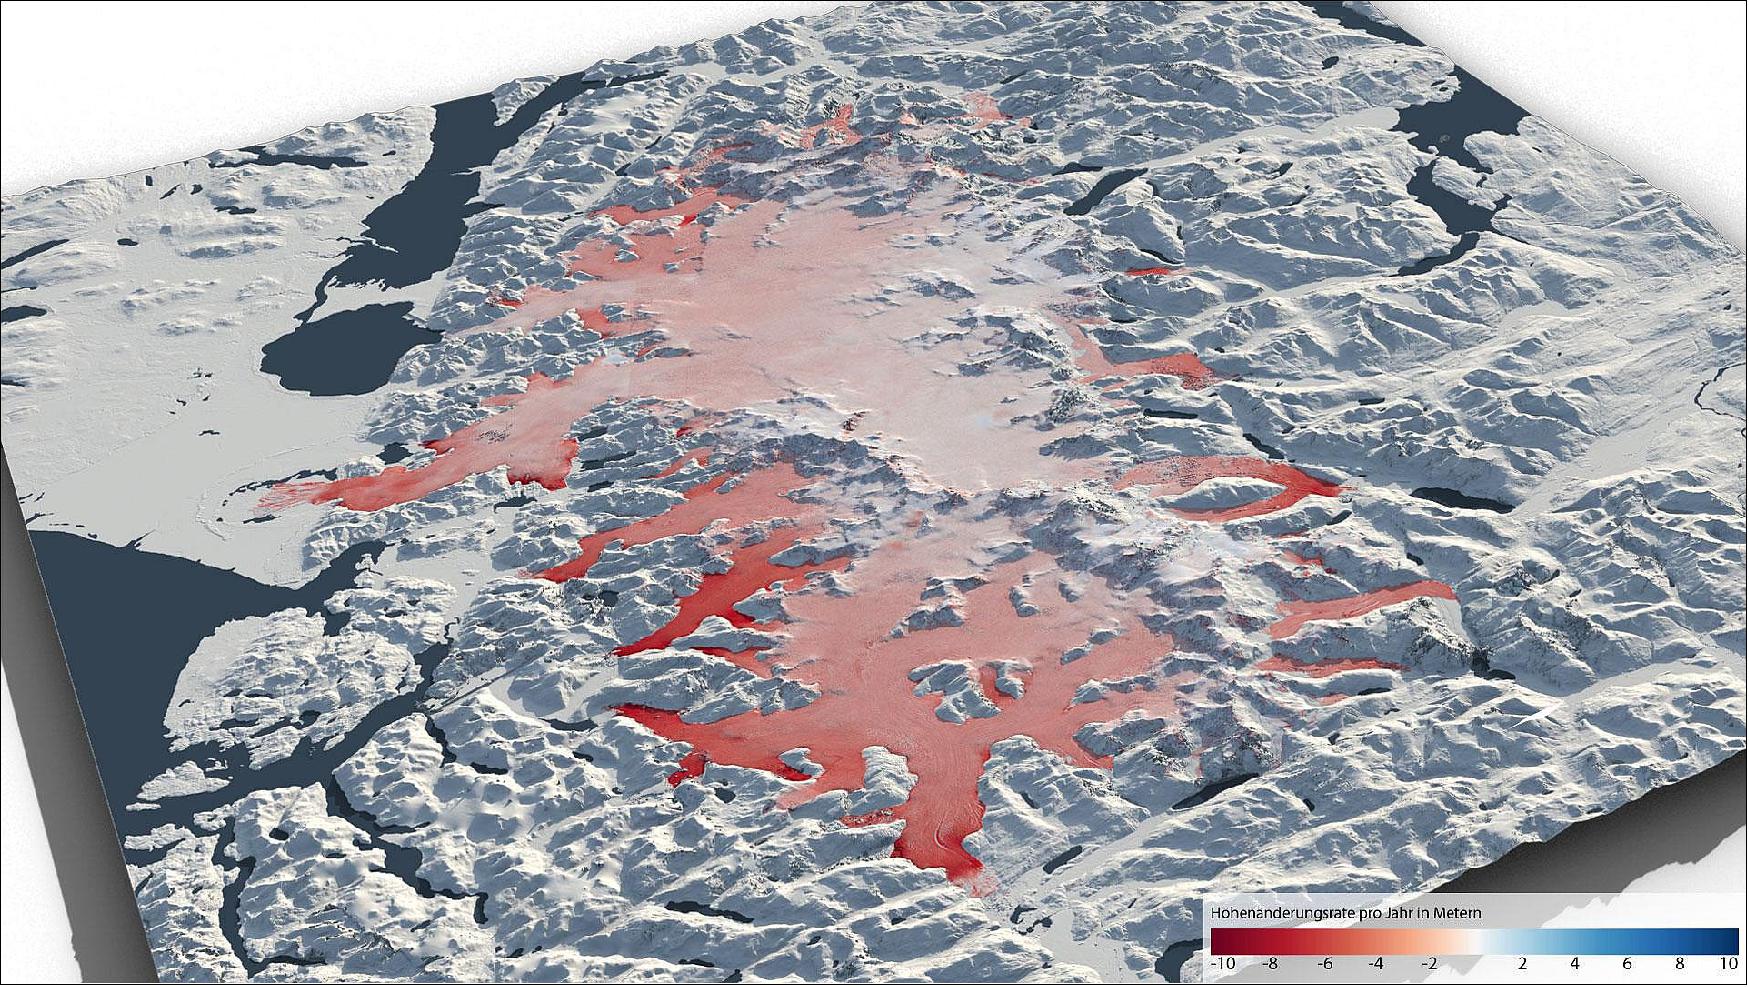 Figure 19: Patagonian ice fields (image credit: DLR/EOC)